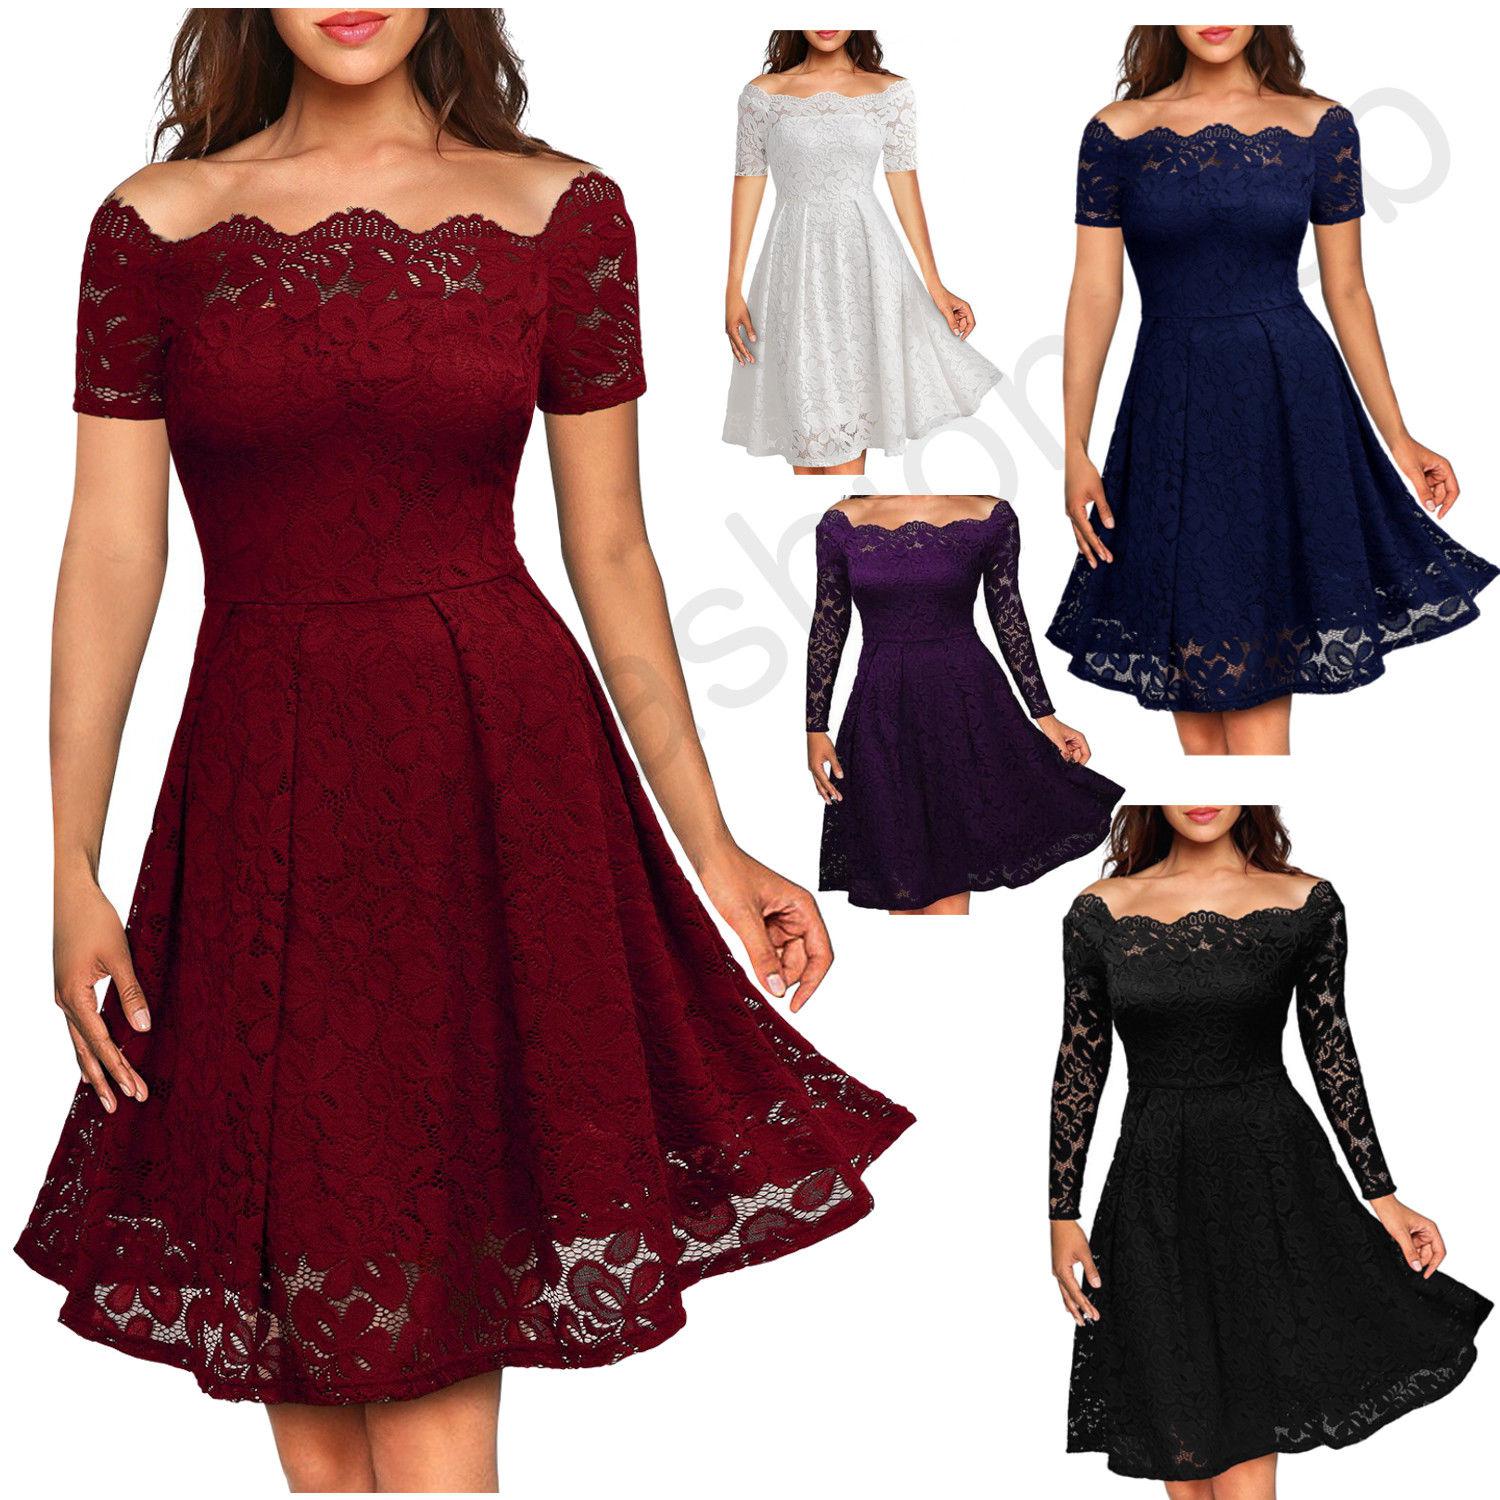 Women's Vintage Lace Boat Neck Formal Wedding Cocktail Evening Party Swing Dress: Cocktail Mini Dress,  Plus Size Party Outfits,  Black Girl Plus Size Outfit,  Crochet Dress  